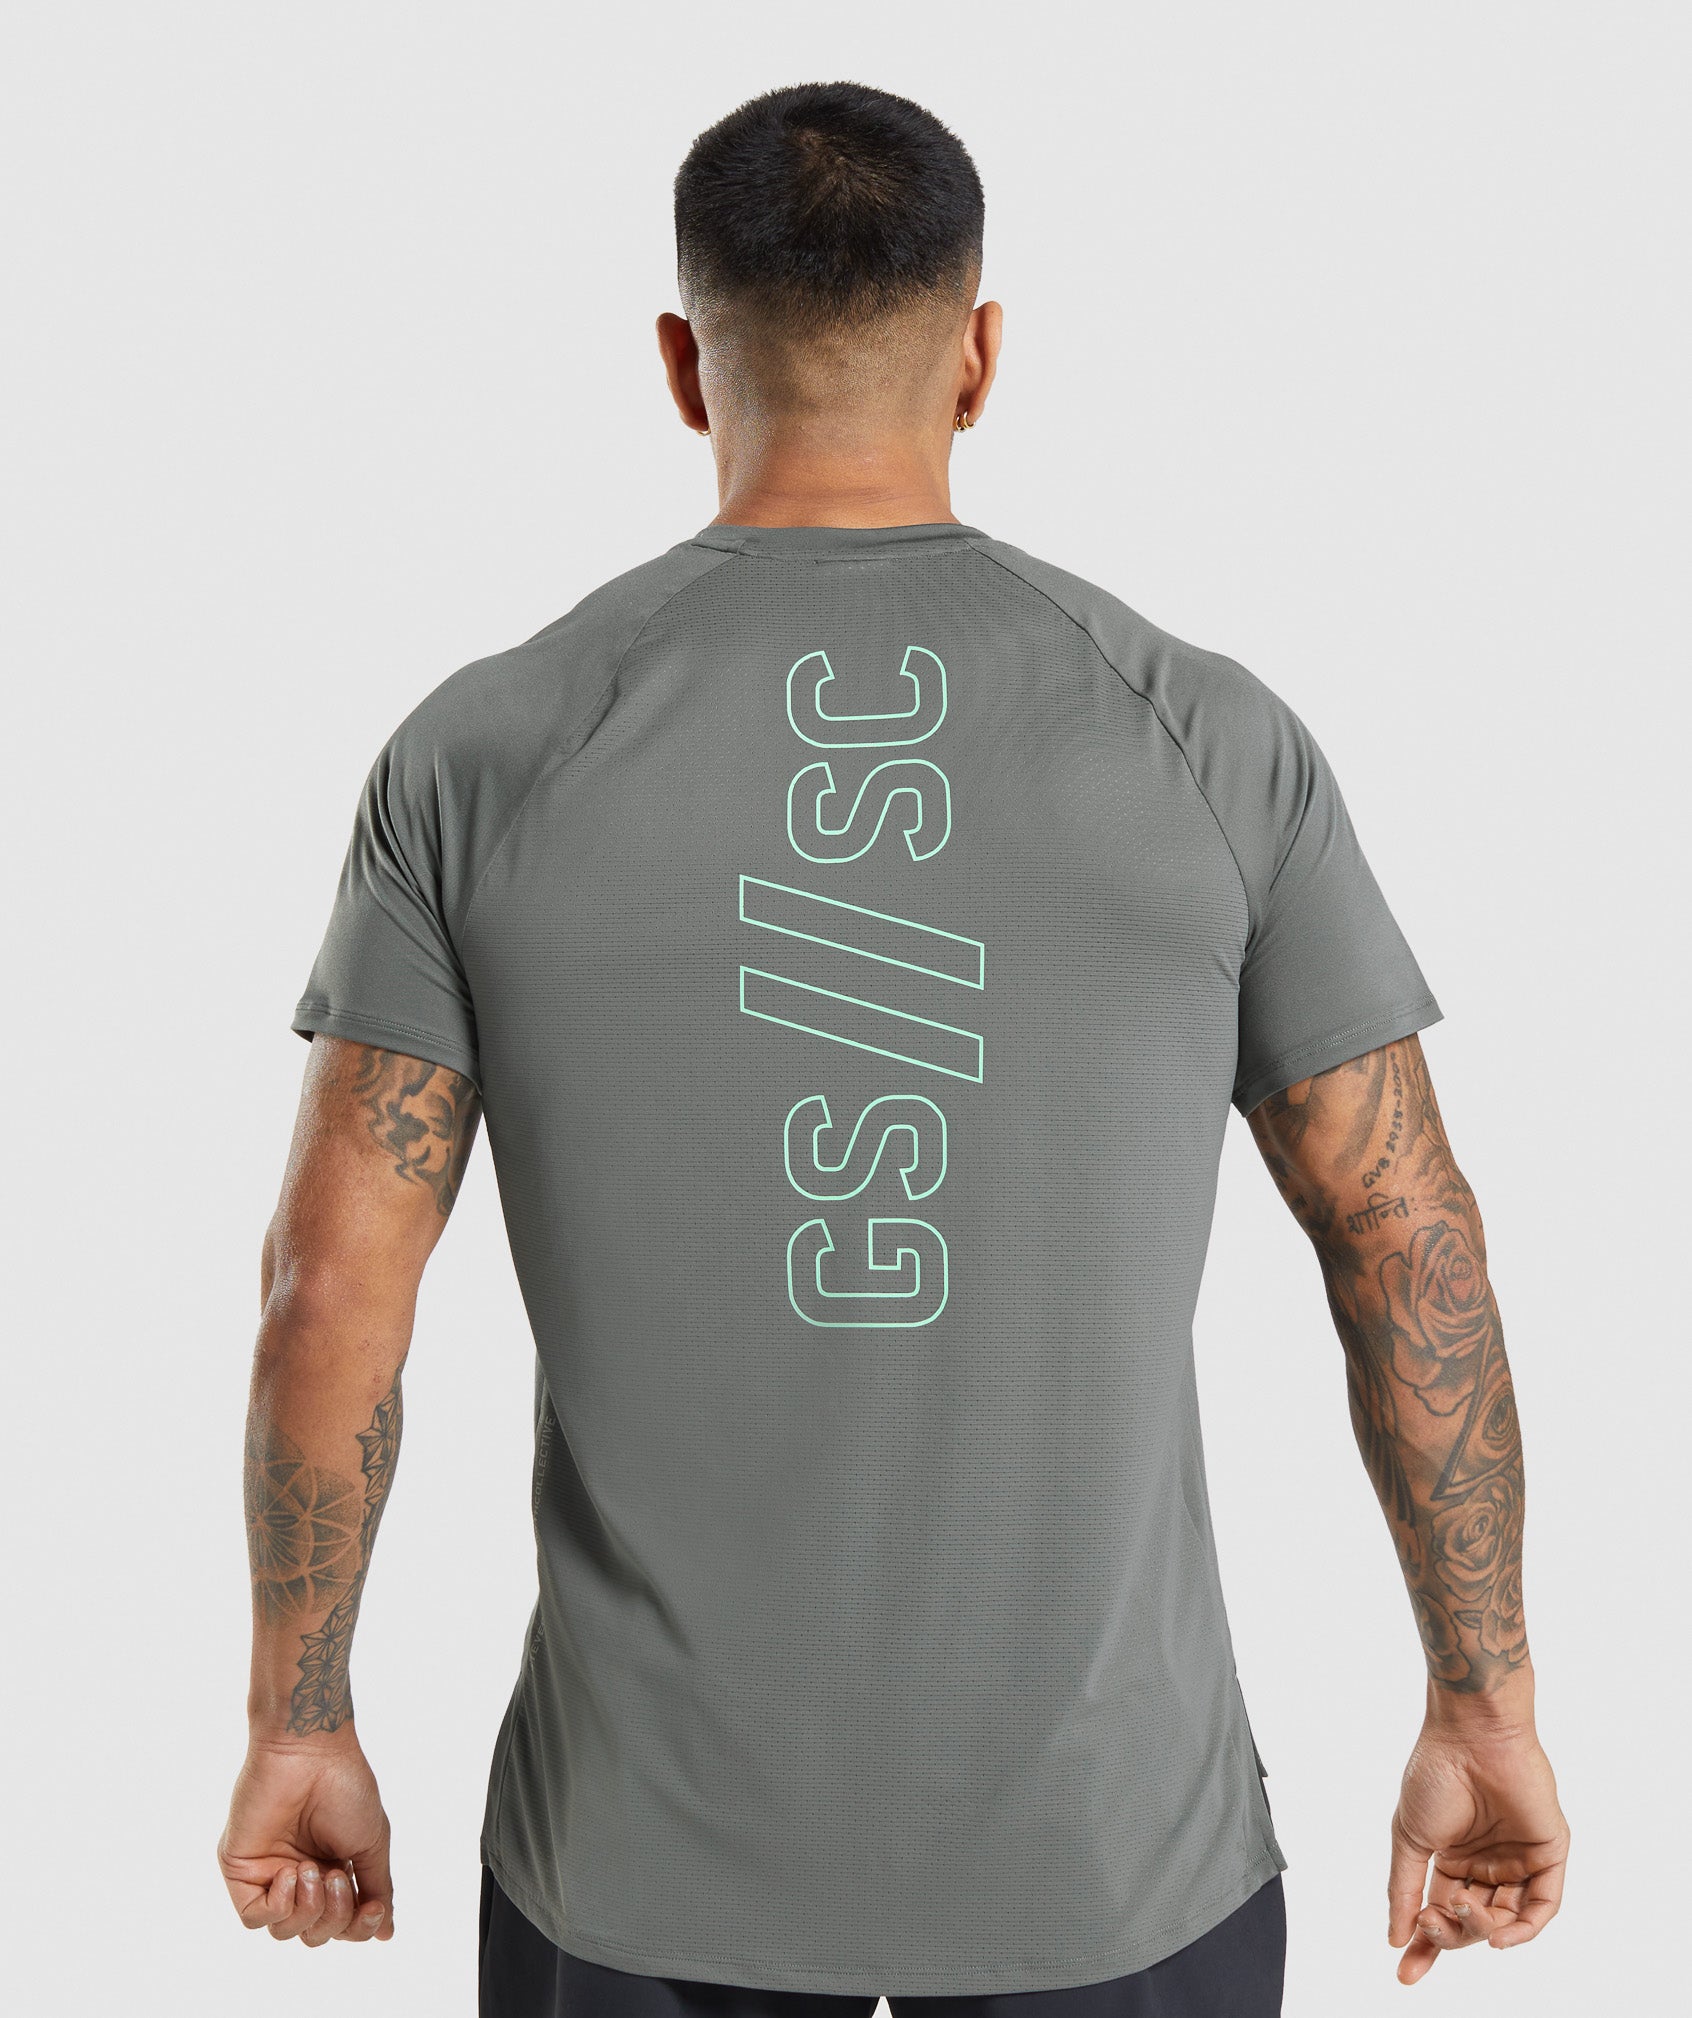 Gymshark//Steve Cook T-Shirt in Charcoal Grey - view 1